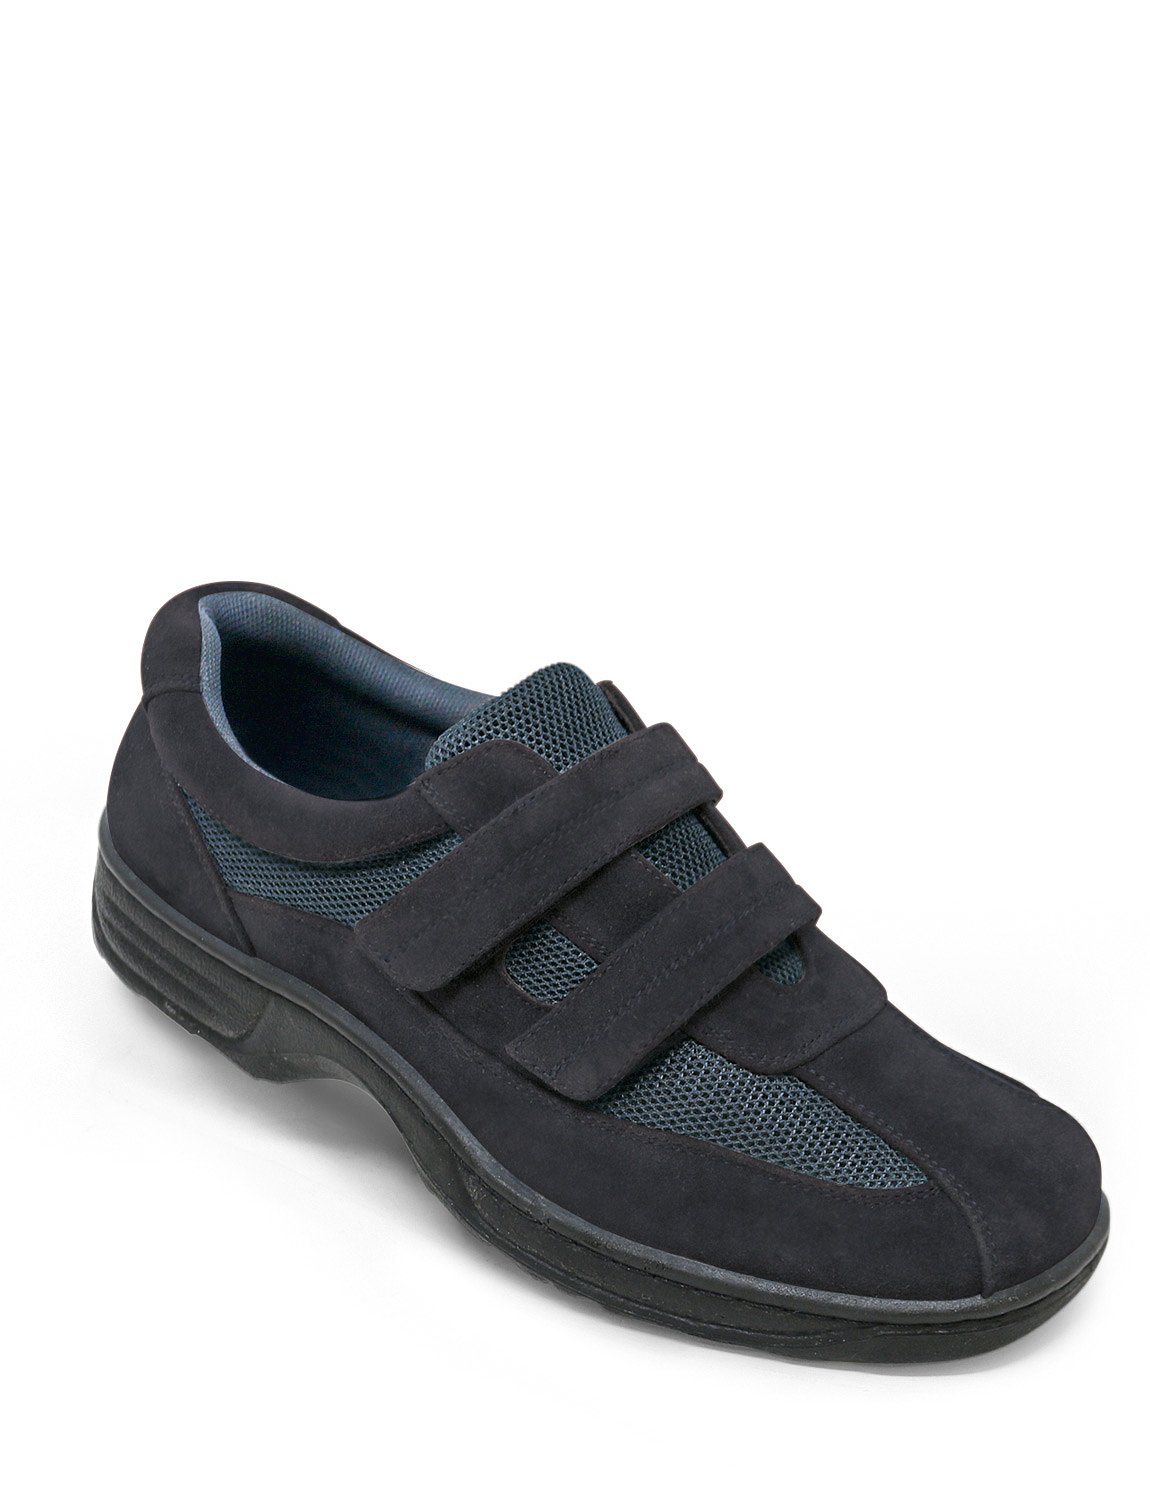 paradox wide fit shoes